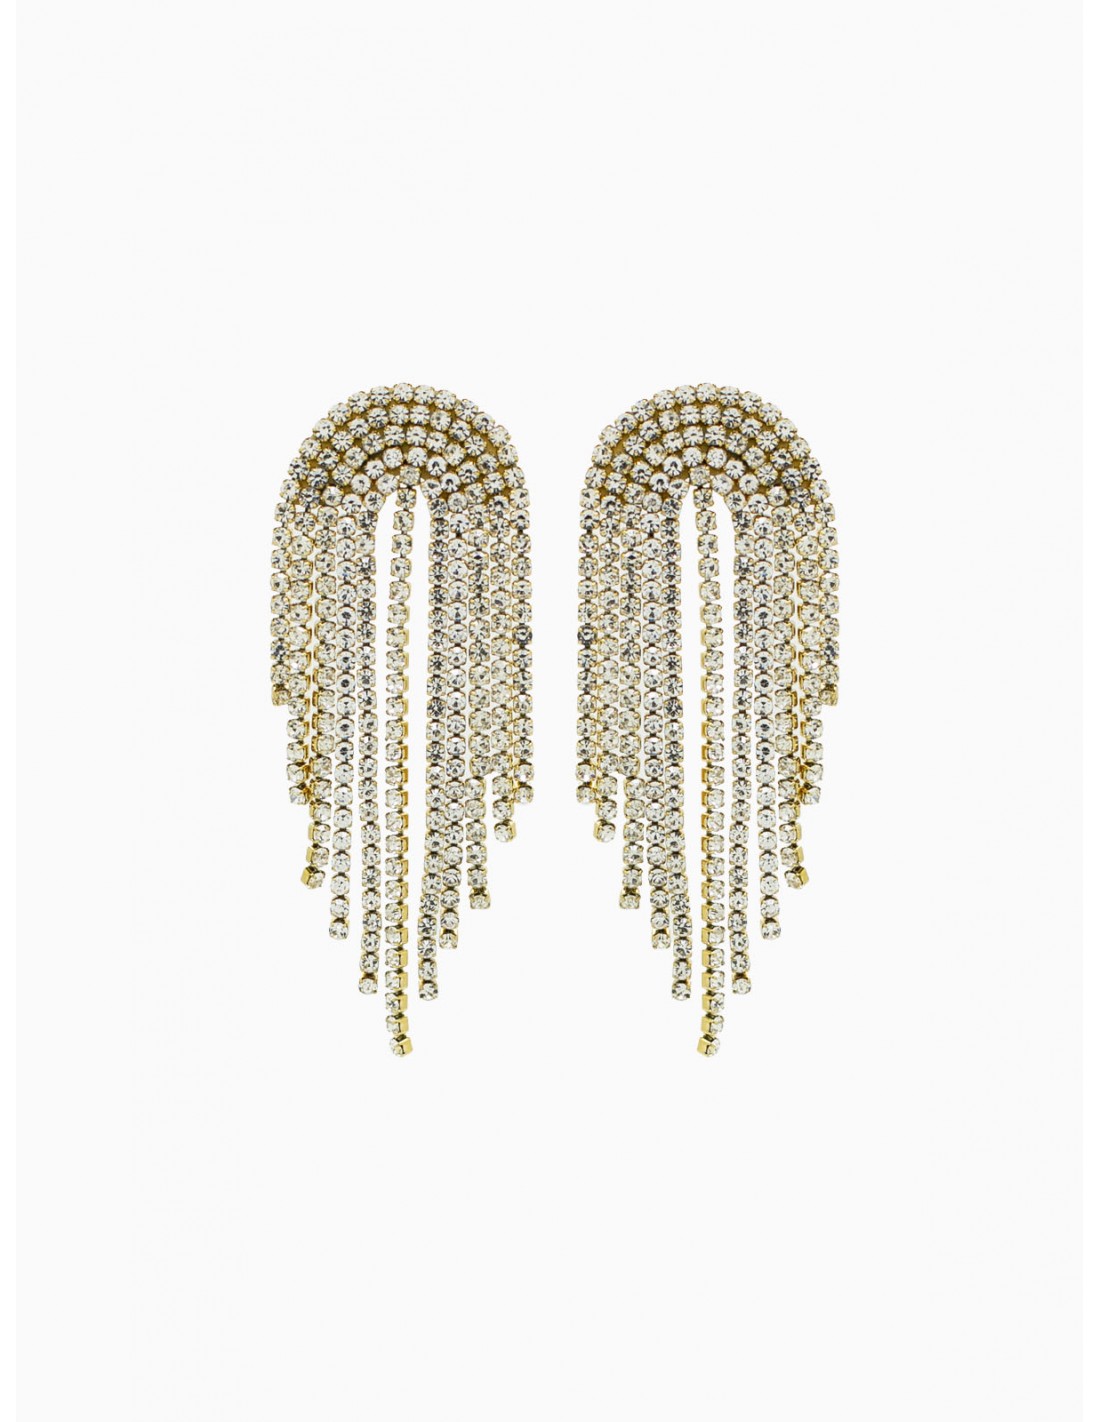 PARTY COTILLON EARRINGS